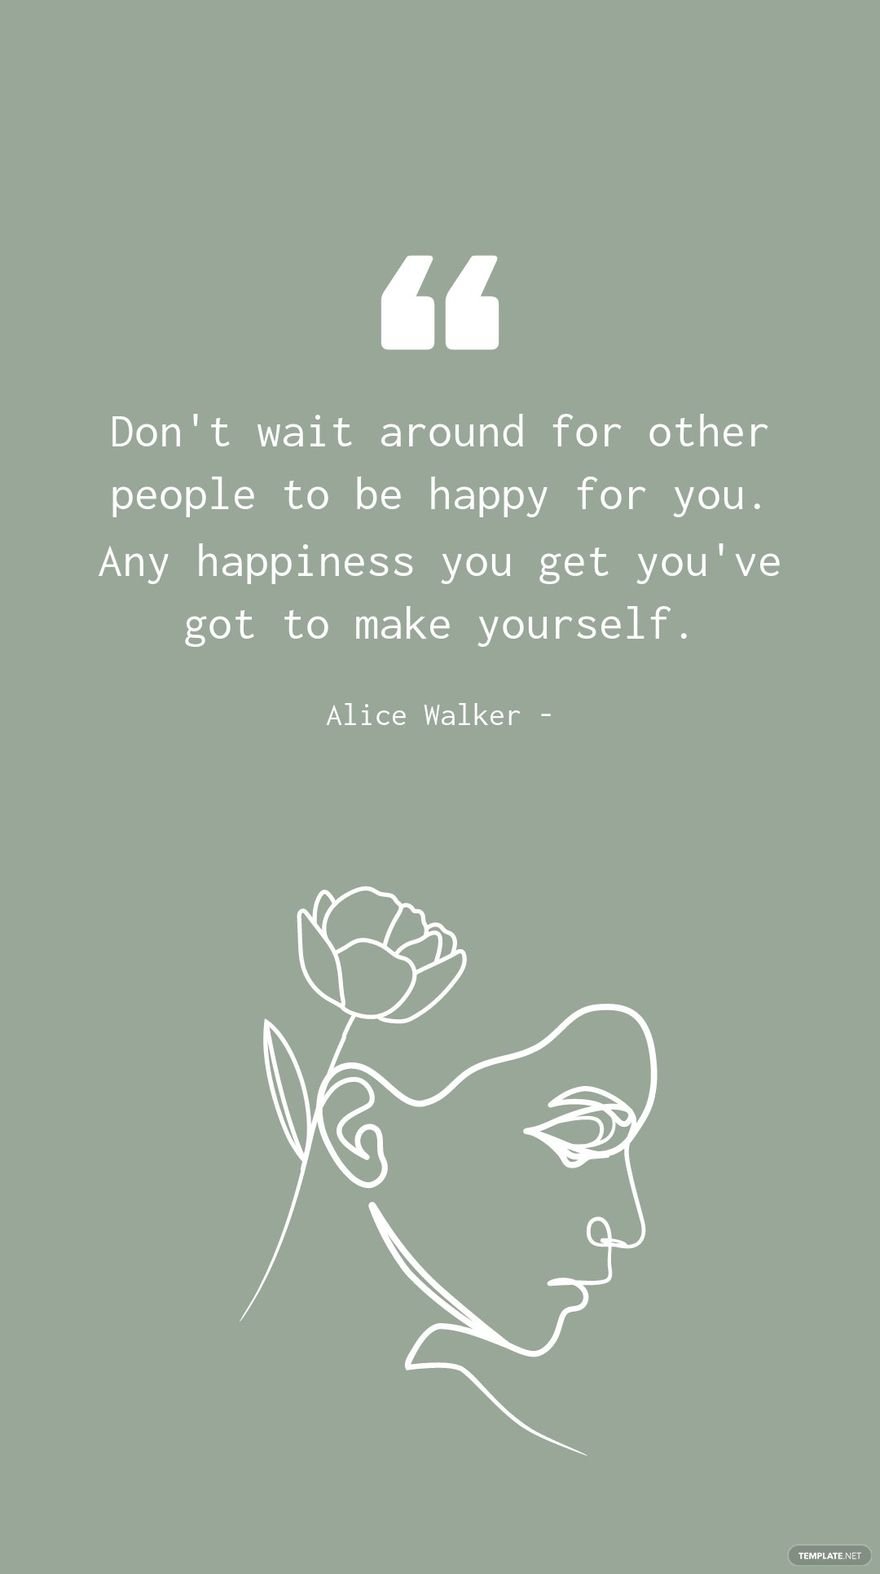 Alice Walker - Don't wait around for other people to be happy for you. Any happiness you get you've got to make yourself. in JPG